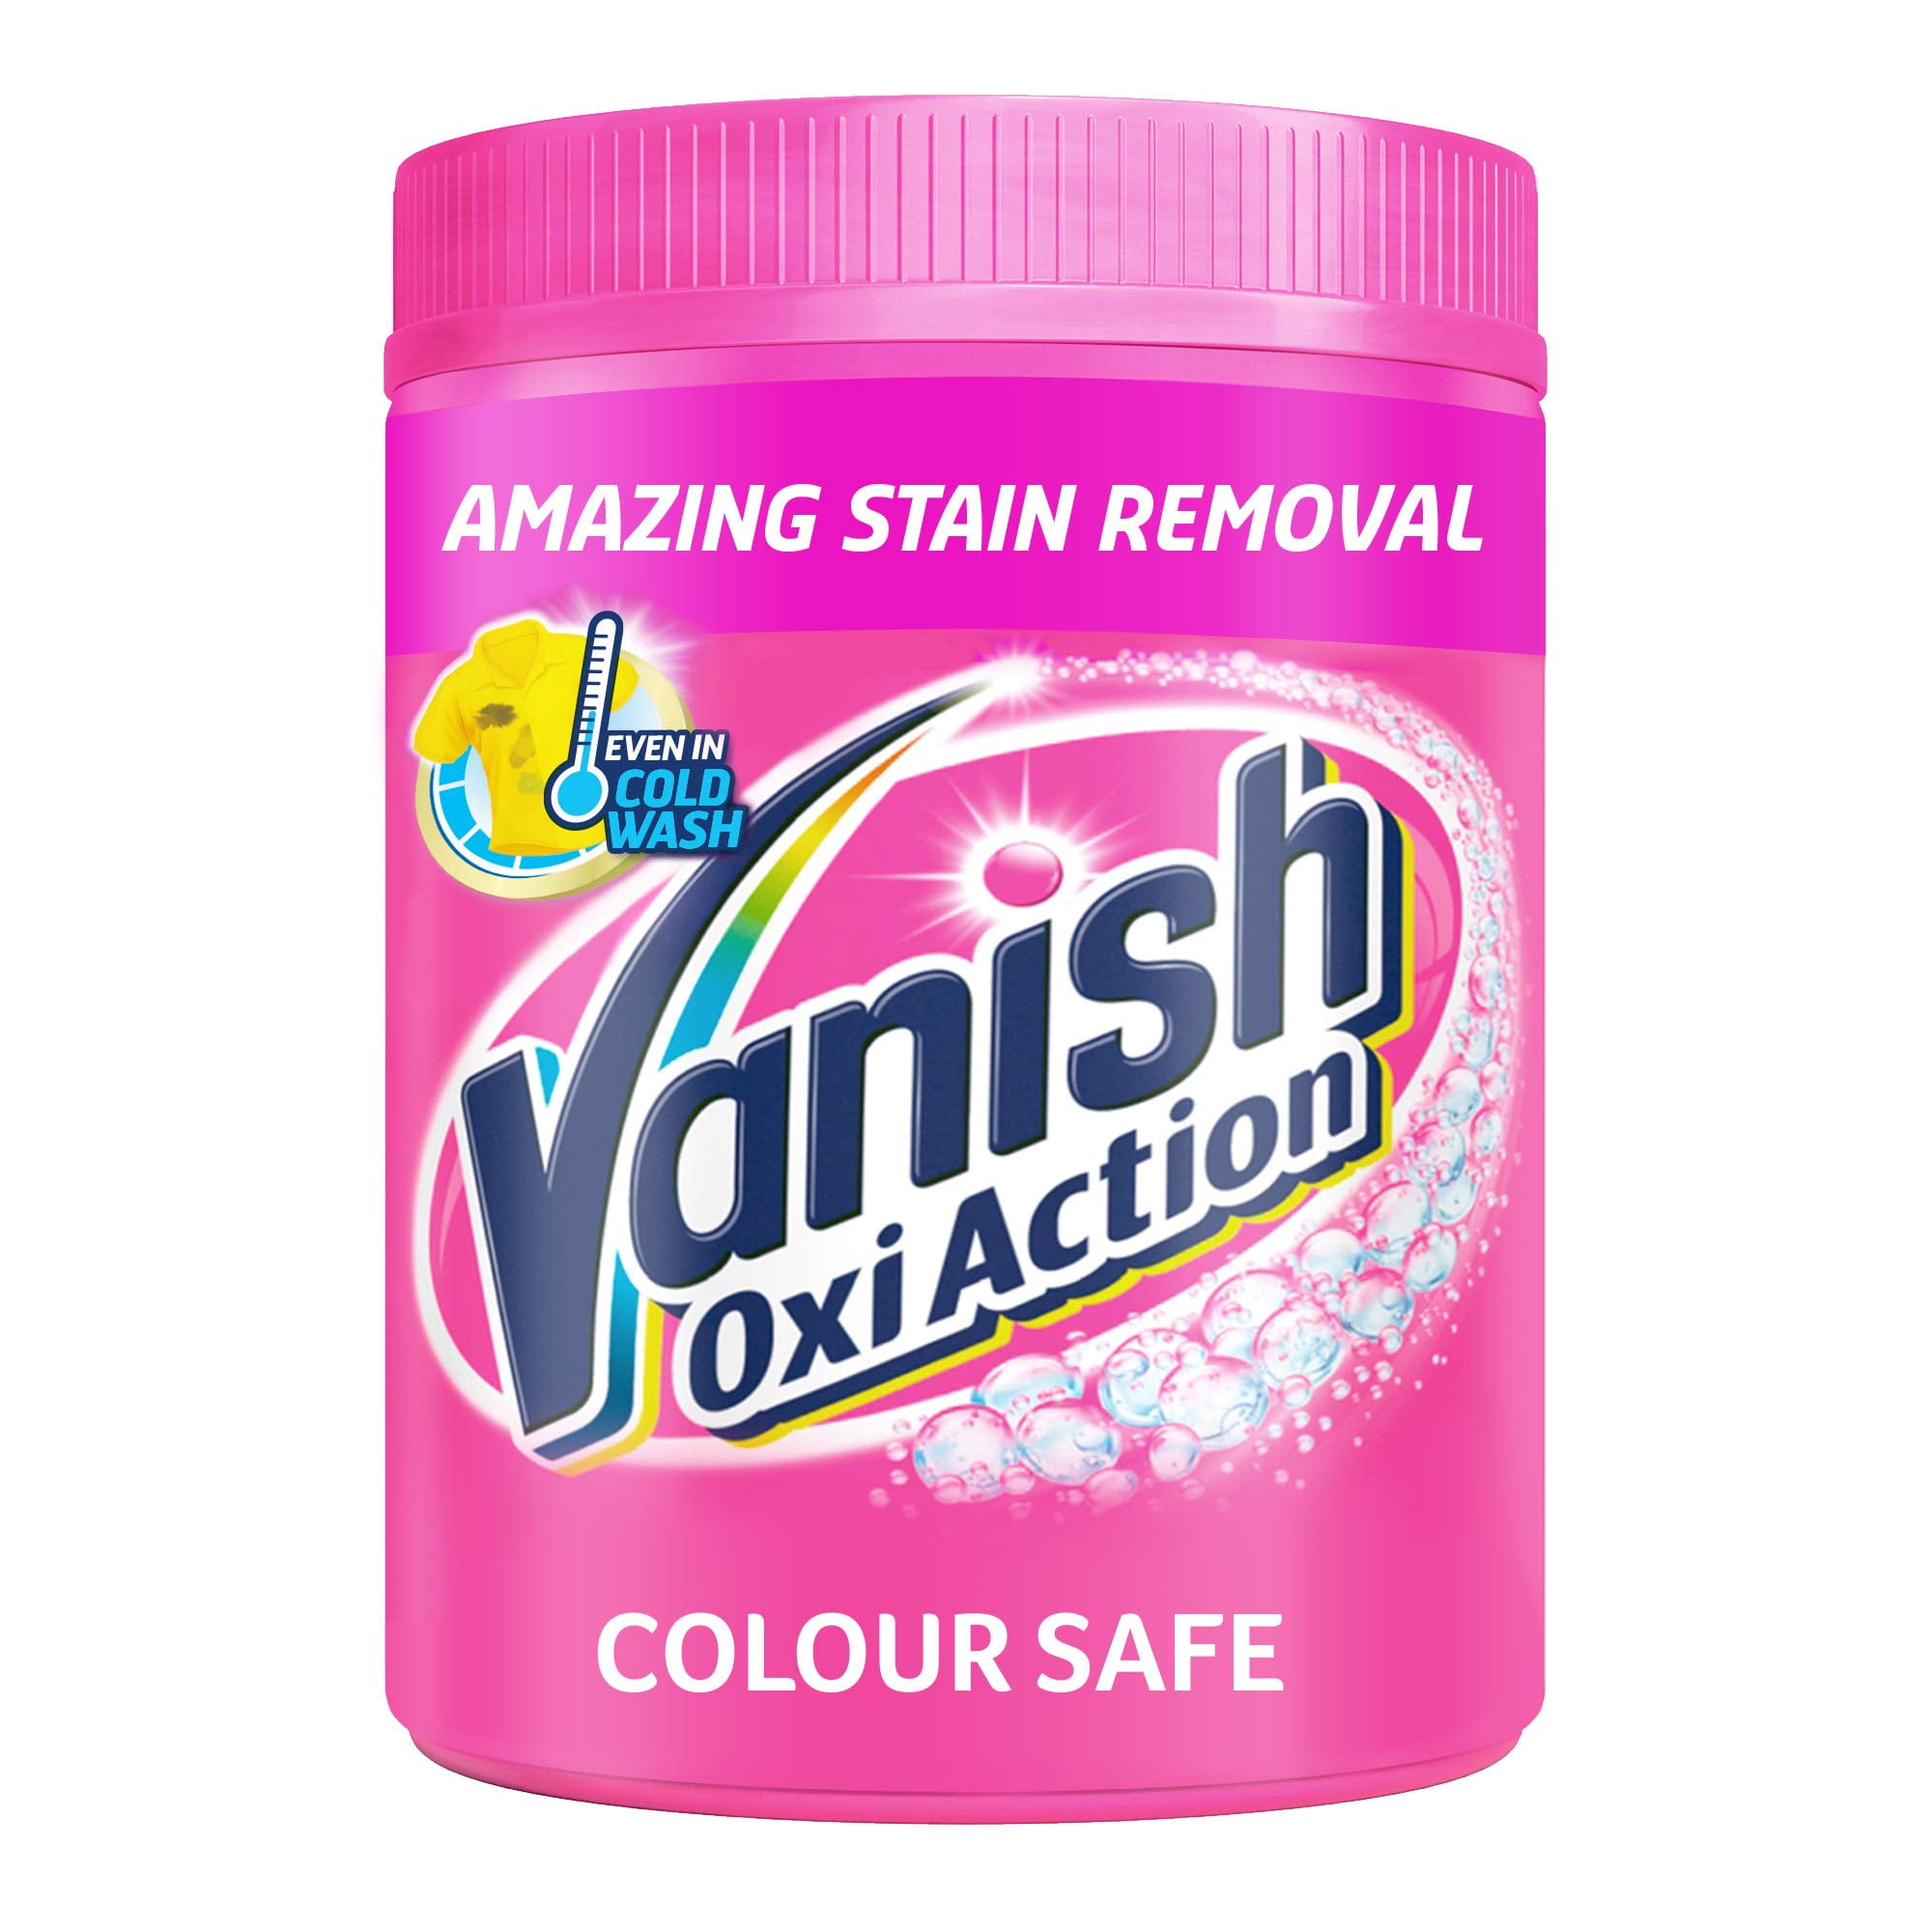 Vanish Oxi Action Stain Remover Powder 470g